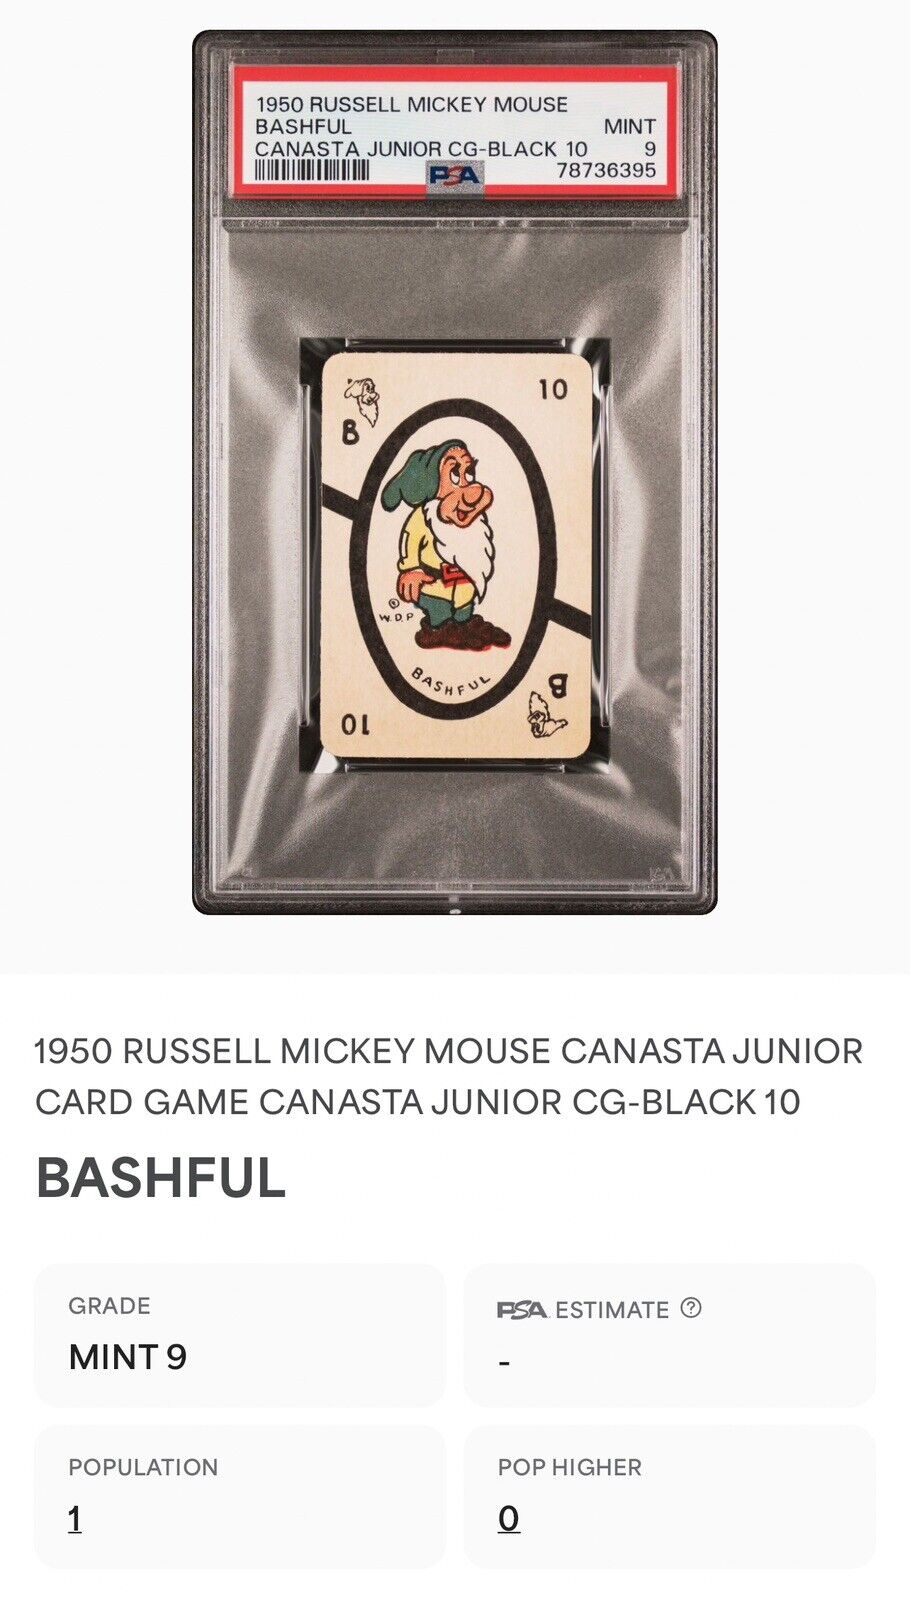 RARE VINTAGE 1950s RUSSELL MICKEY MOUSE BASHFUL CANASTA CARD PSA 9 MINT